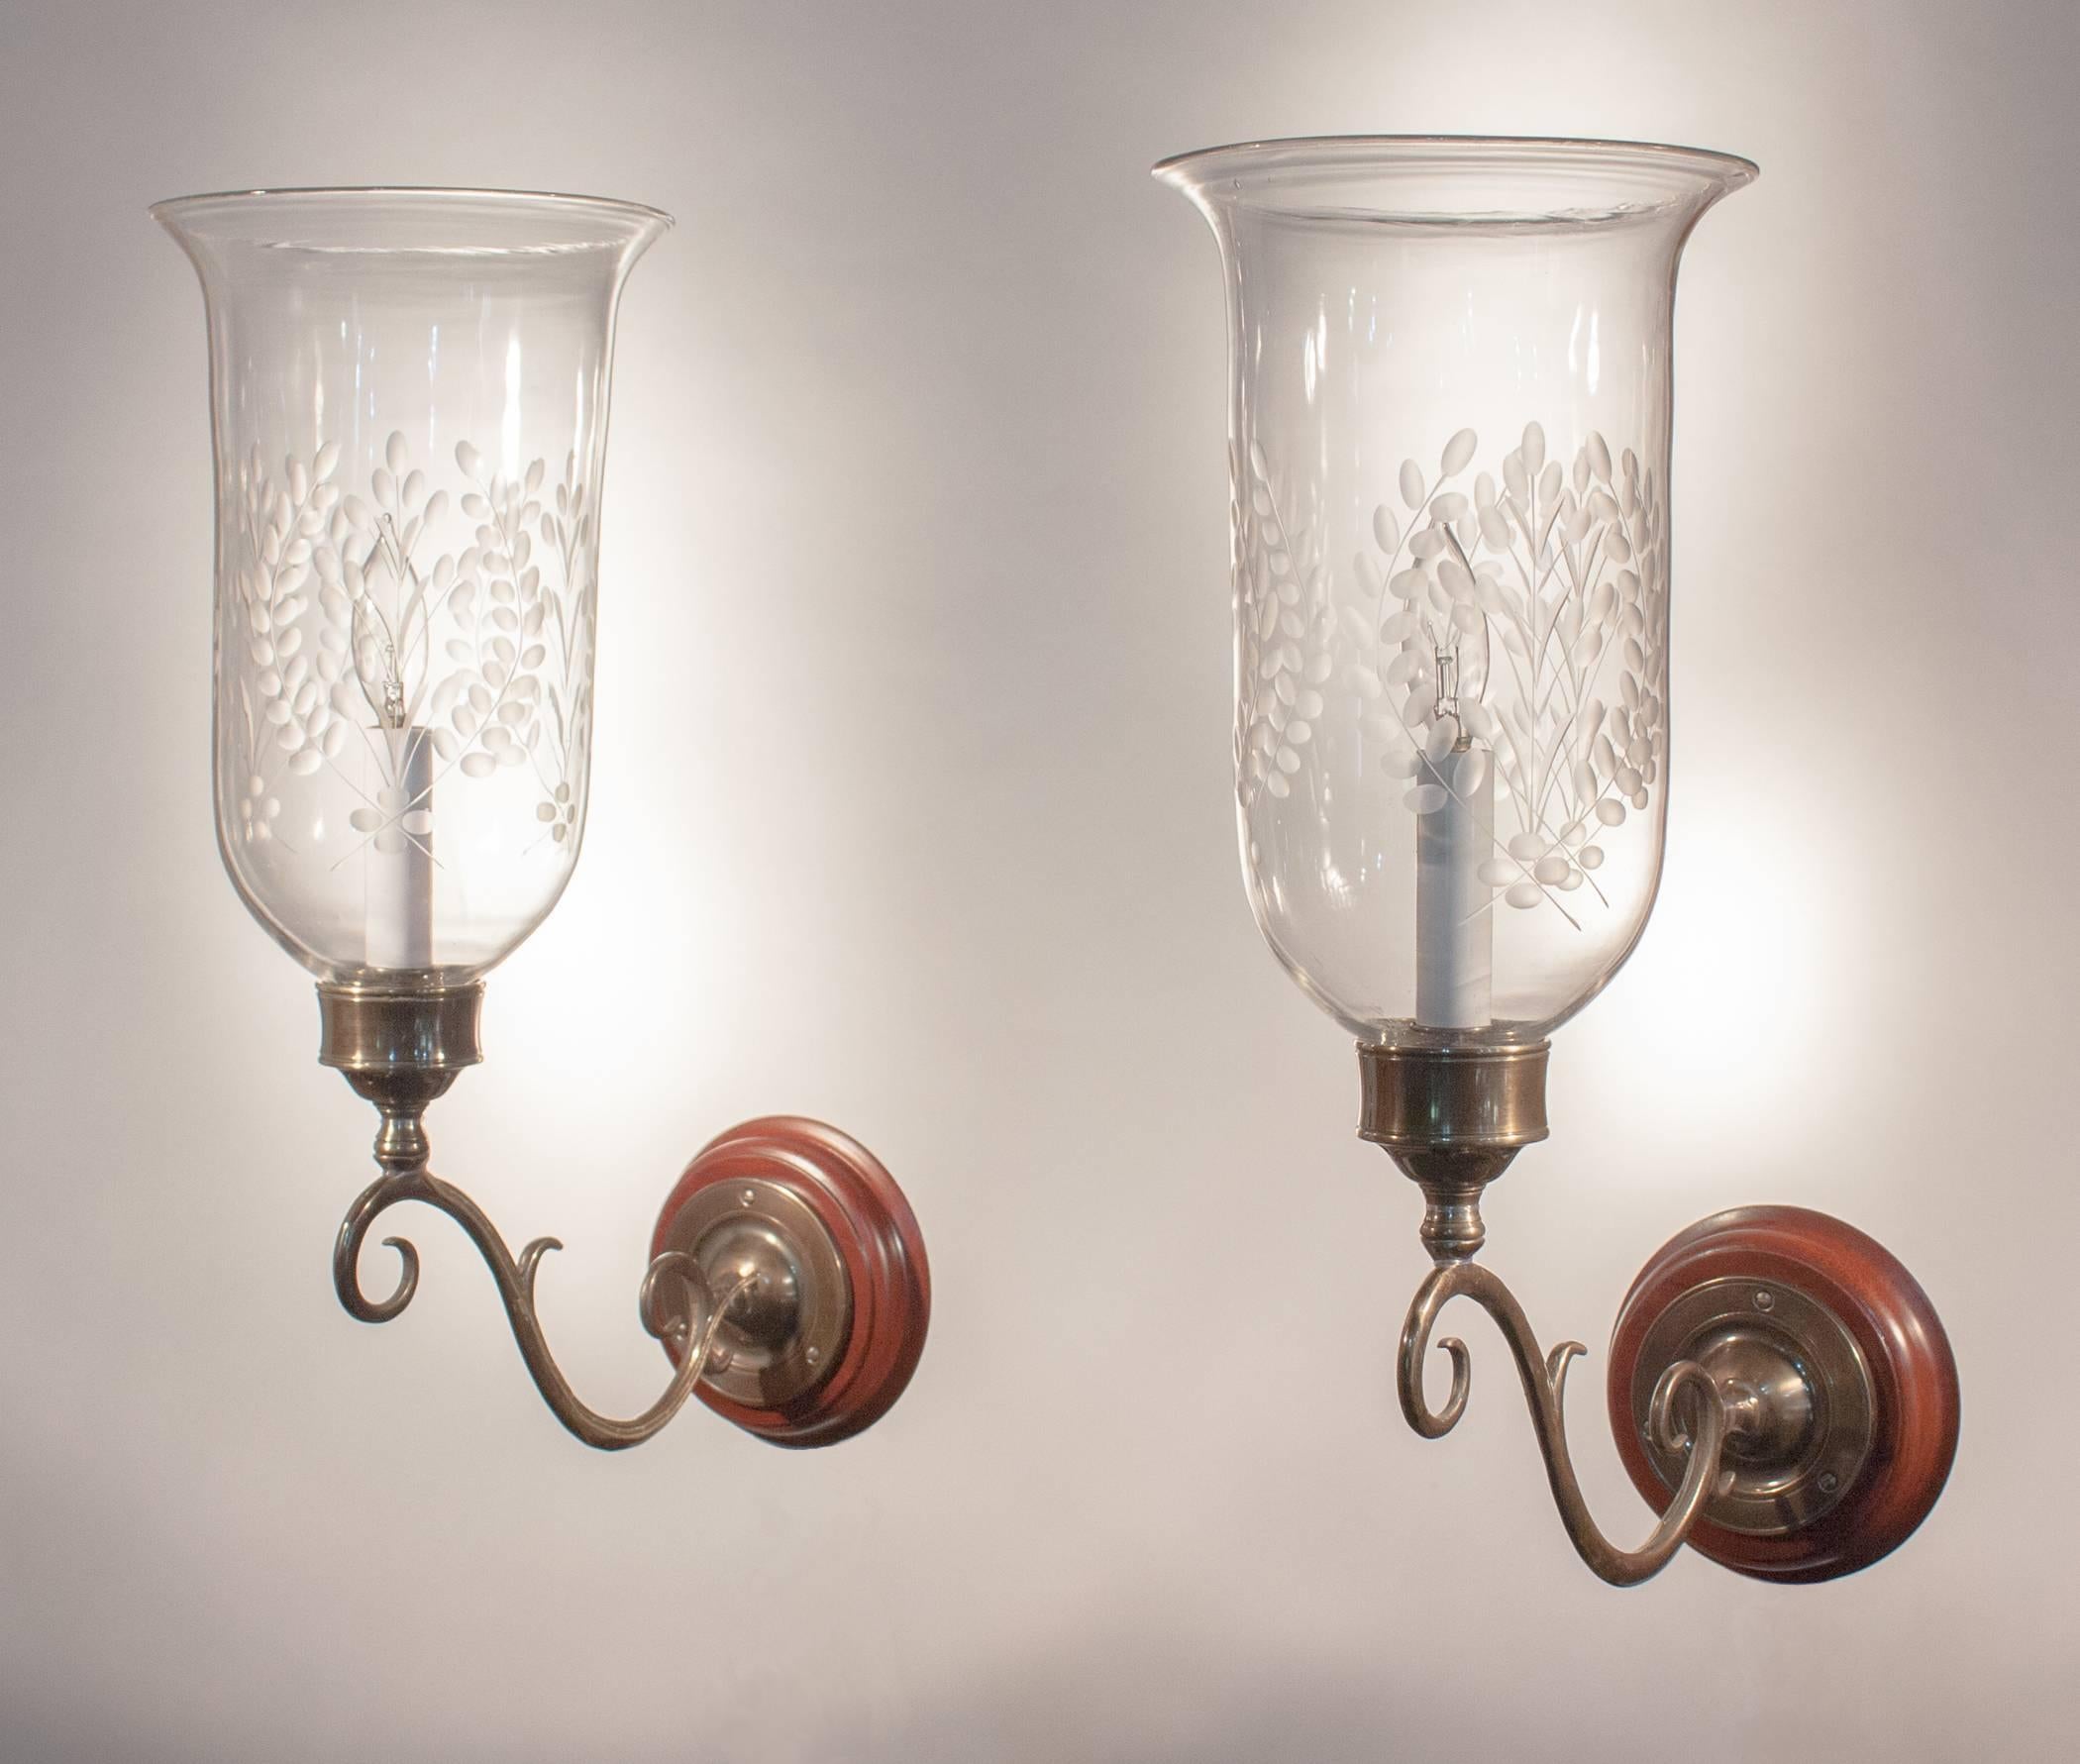 A pair of English hurricane sconce shades with a graceful flare and etched wheat motif, circa 1890. Small air bubbles in the handblown glass speak to both the quality and age of the shades. Custom-fabricated brass sconce arms and mahogany backplates